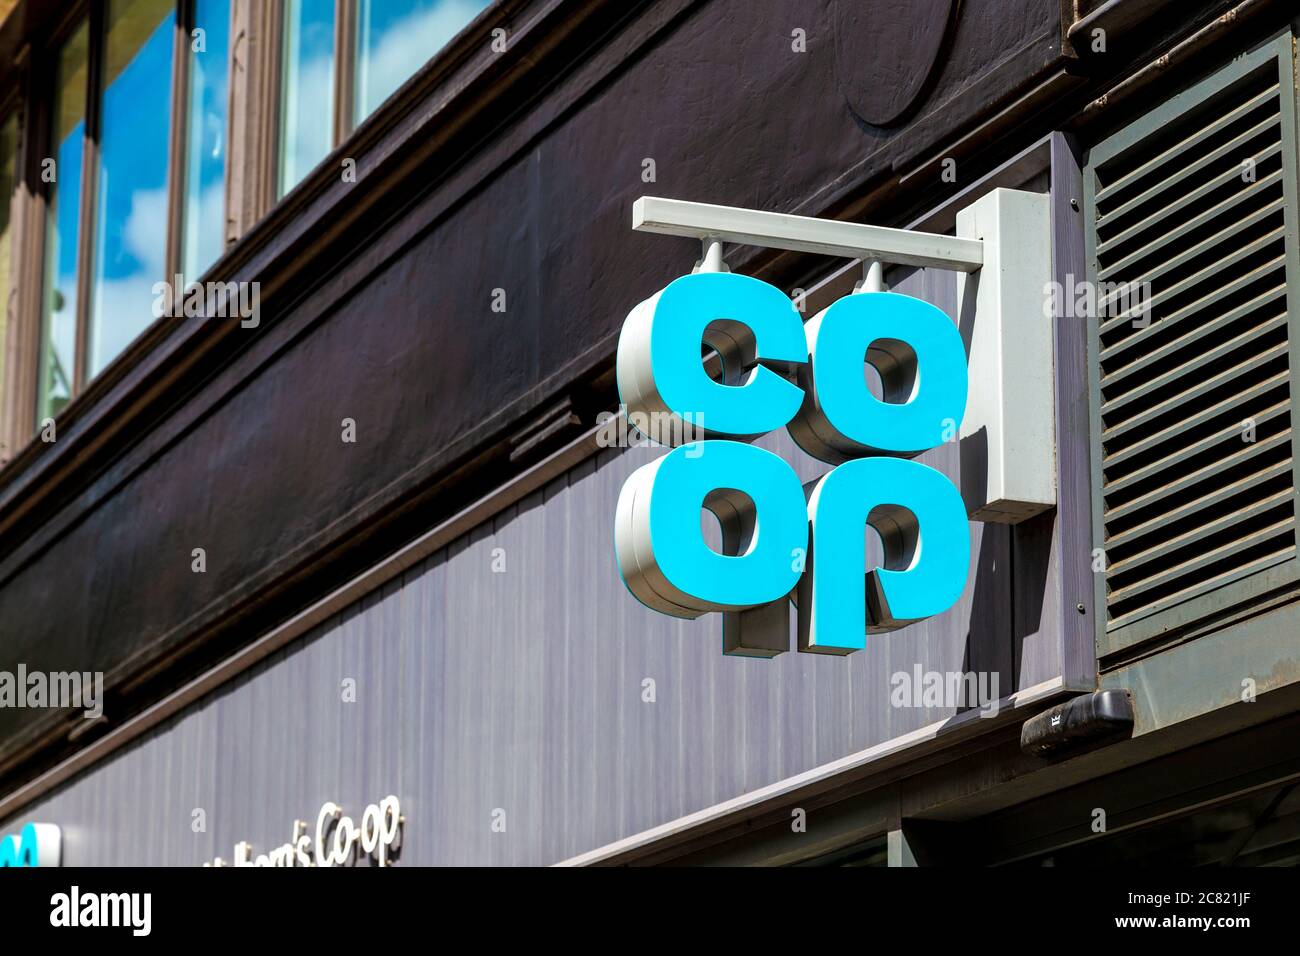 Co-op grocery store chain sign on the facade Stock Photo